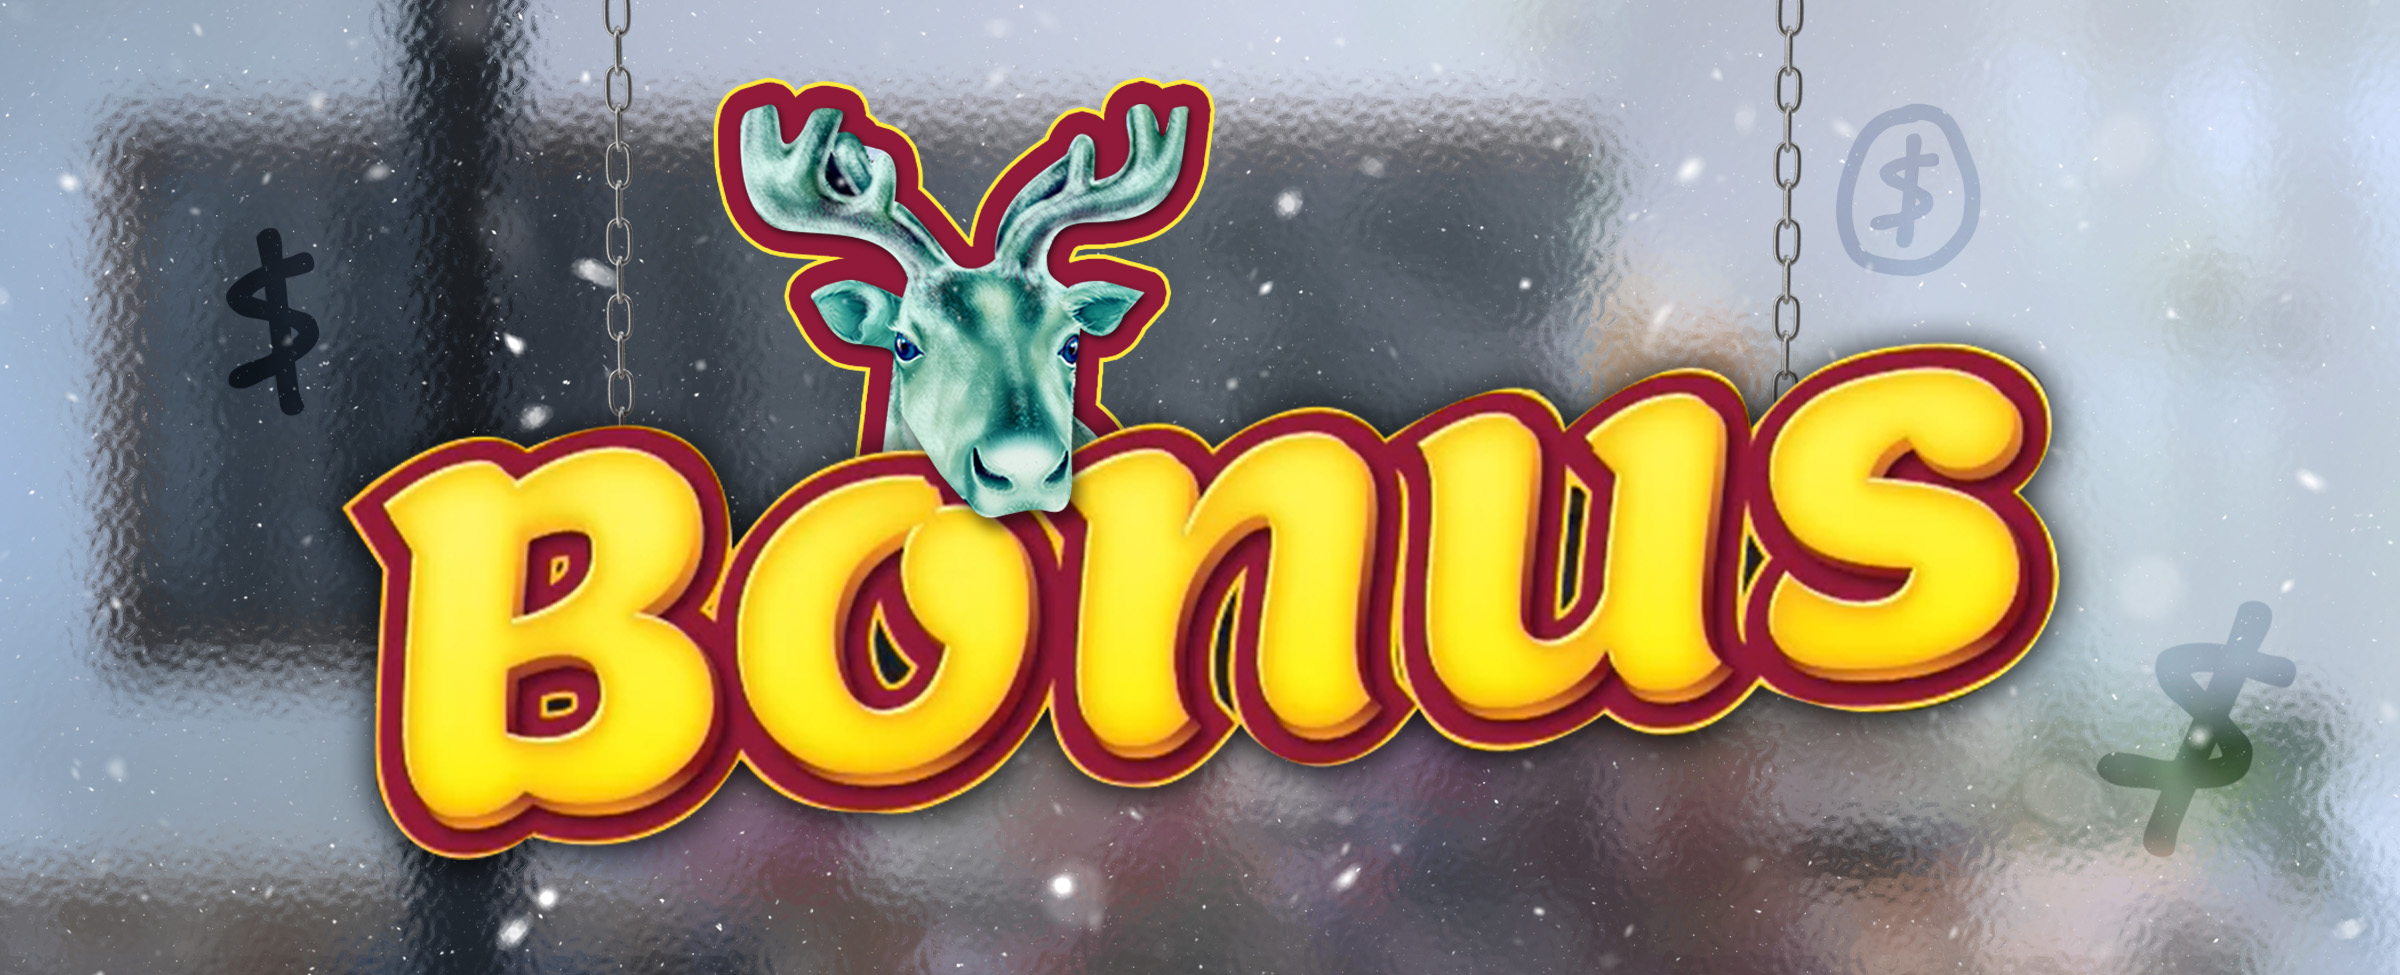 A bright sign hangs in a shop front window from thin chains on either side, the feature of which is the word “Bonus”, with an aqua monotone reindeer positioned between above it.